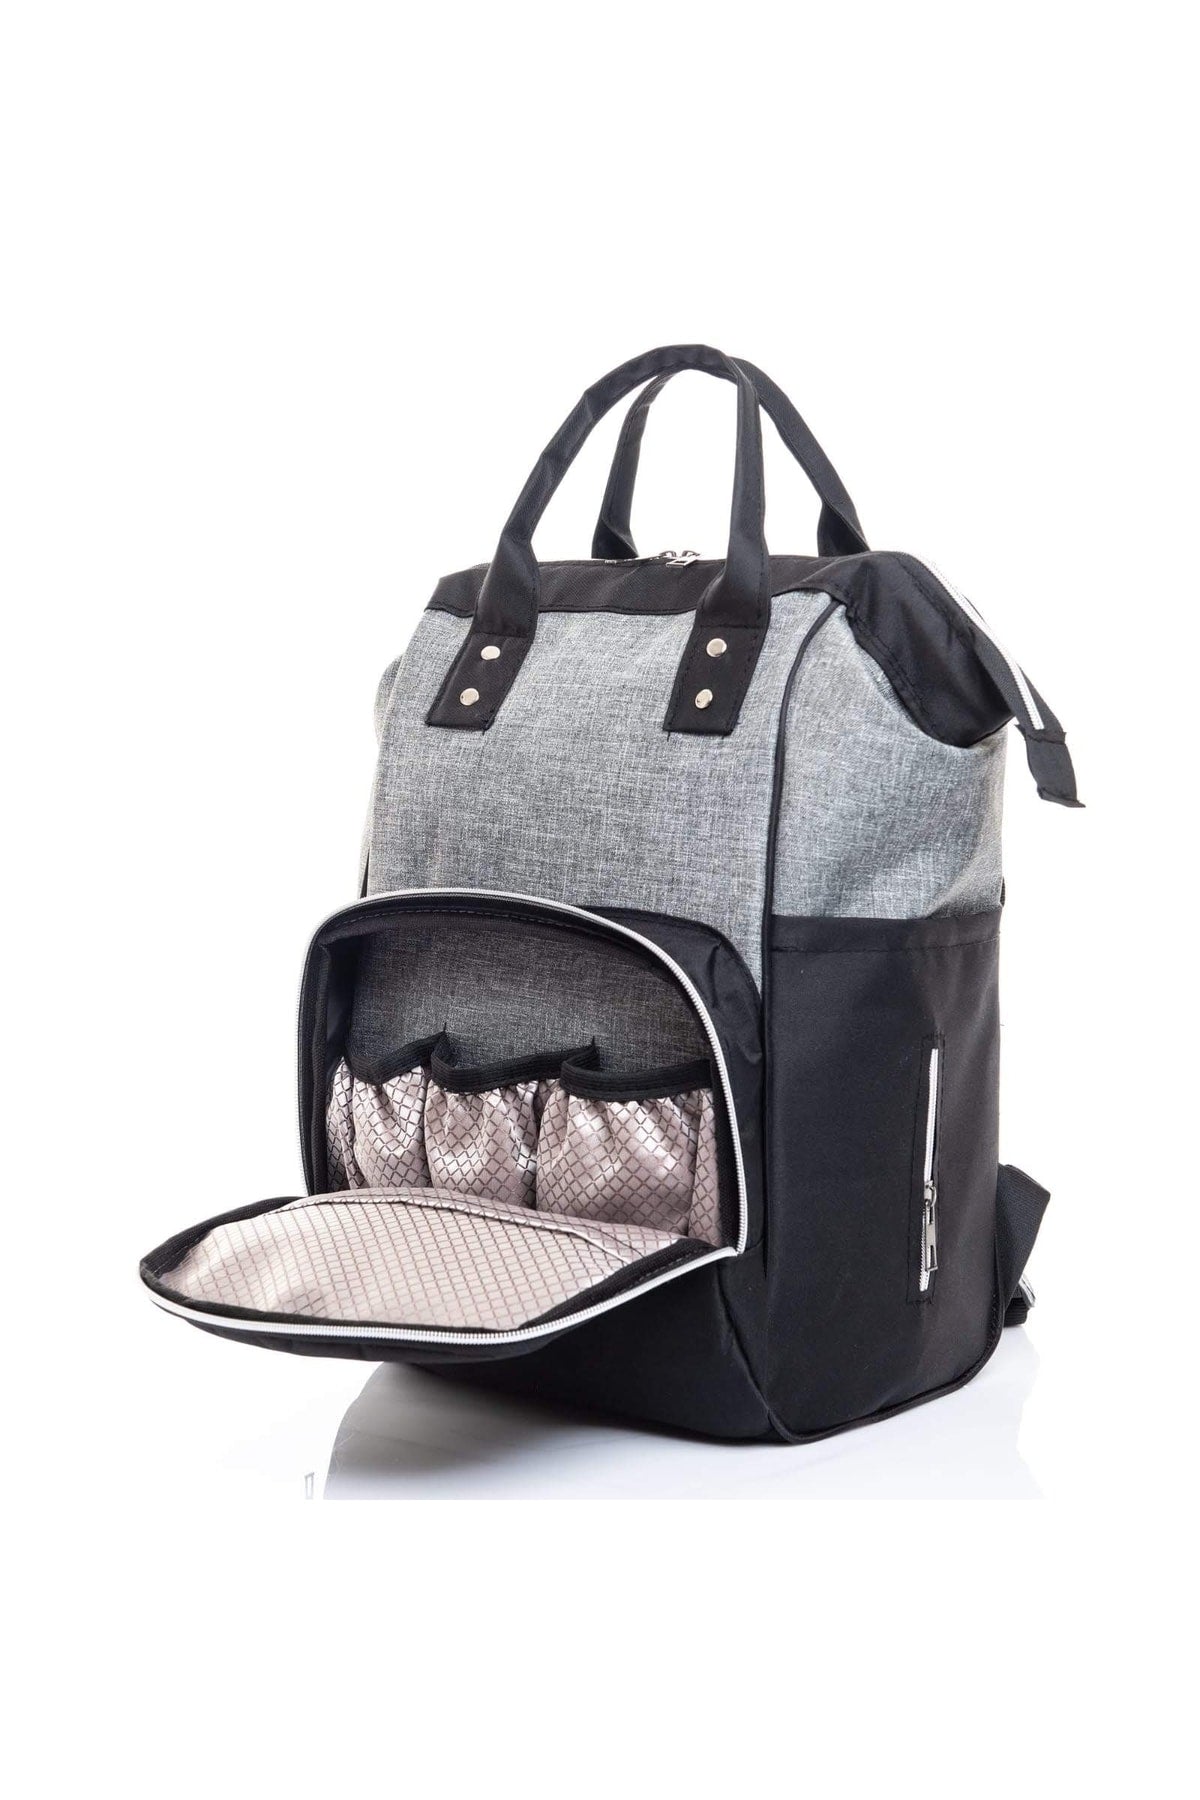 Mother Baby Care Black Gray